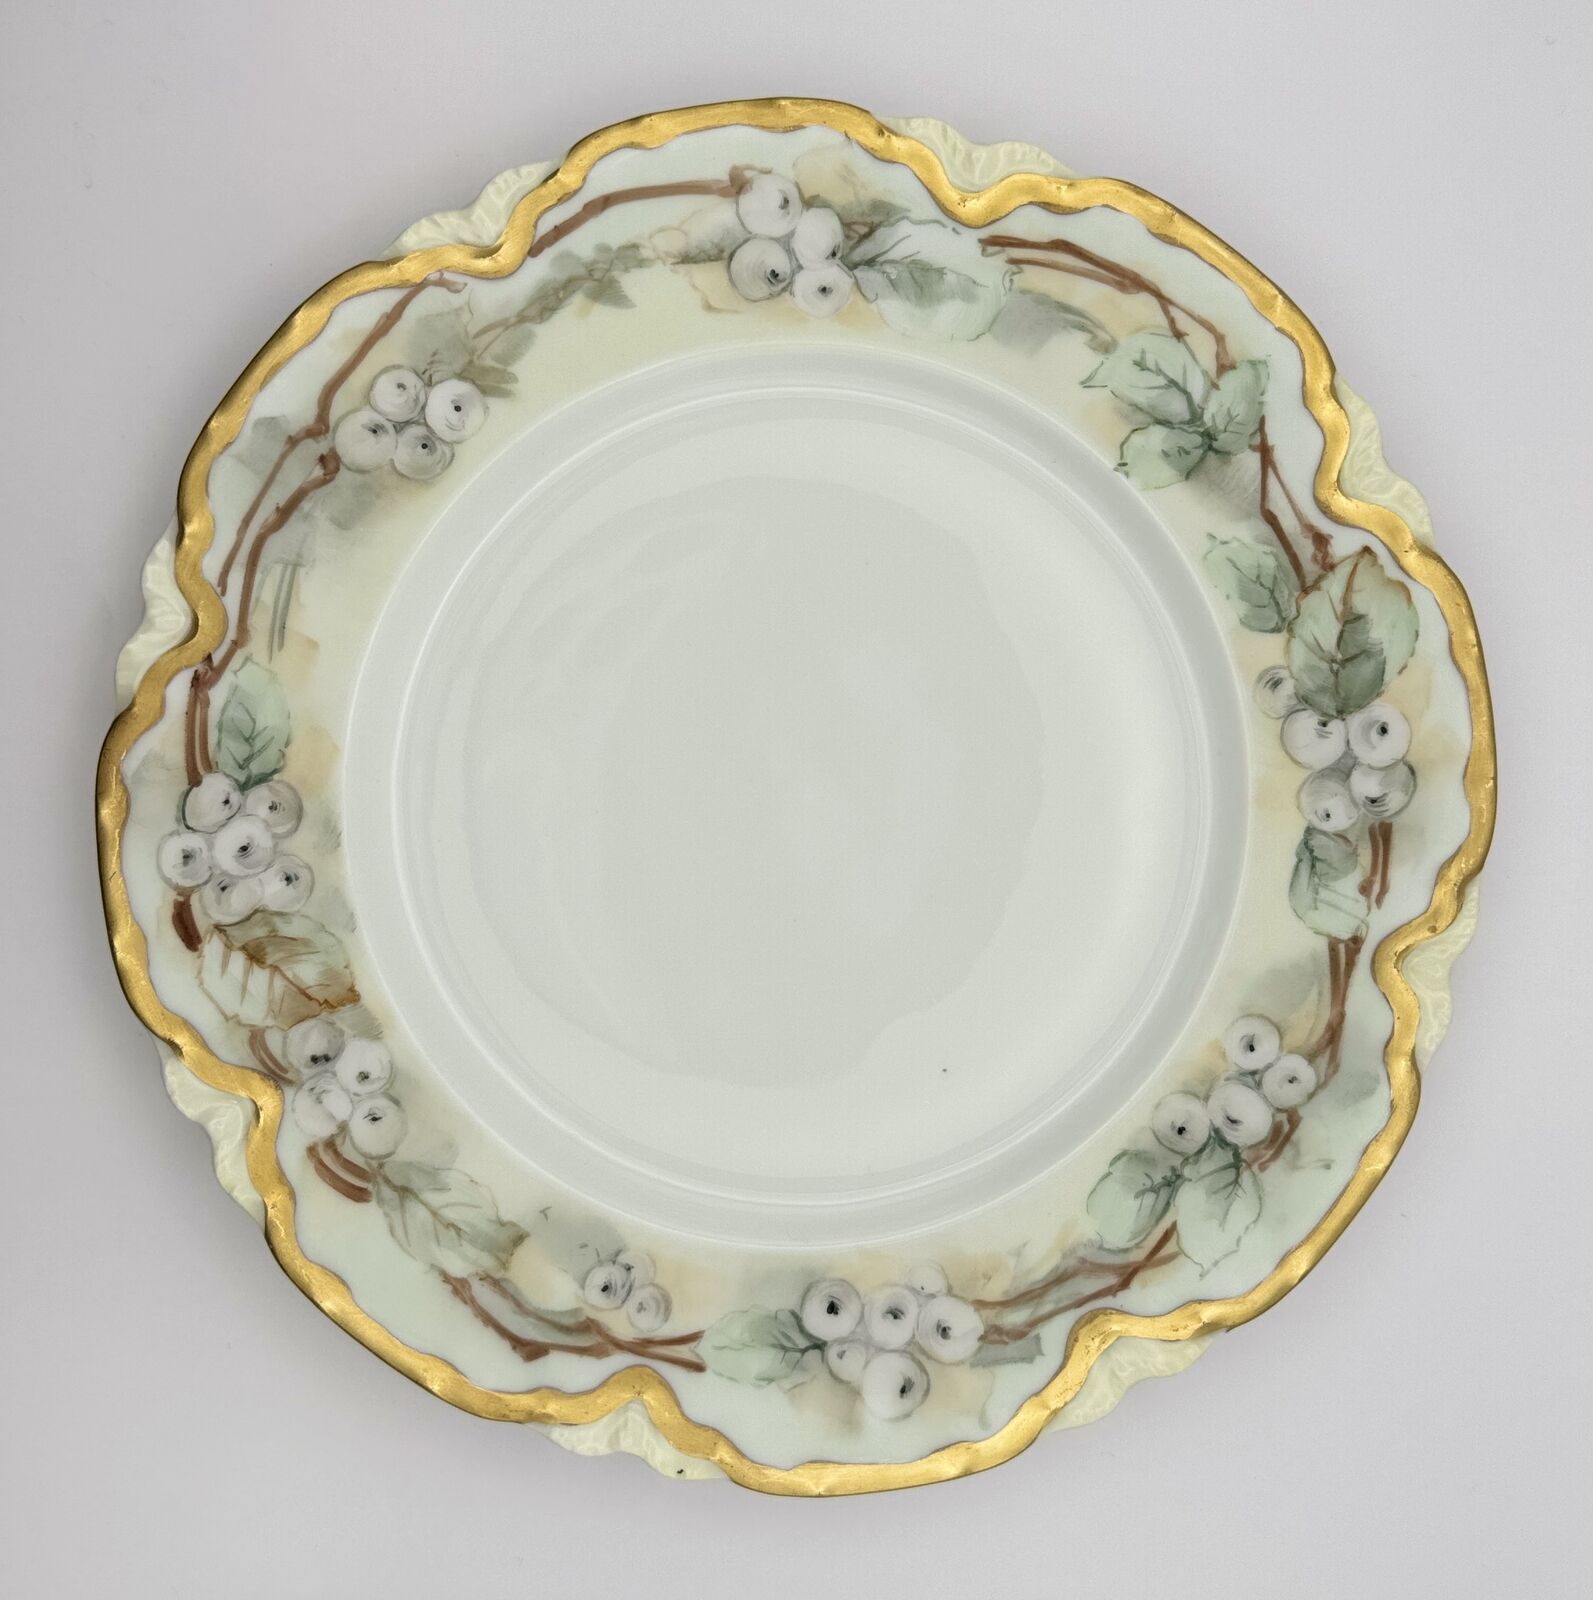 Haviland France Hand-Painted Porcelain Plate with Gold Trim and Floral Design